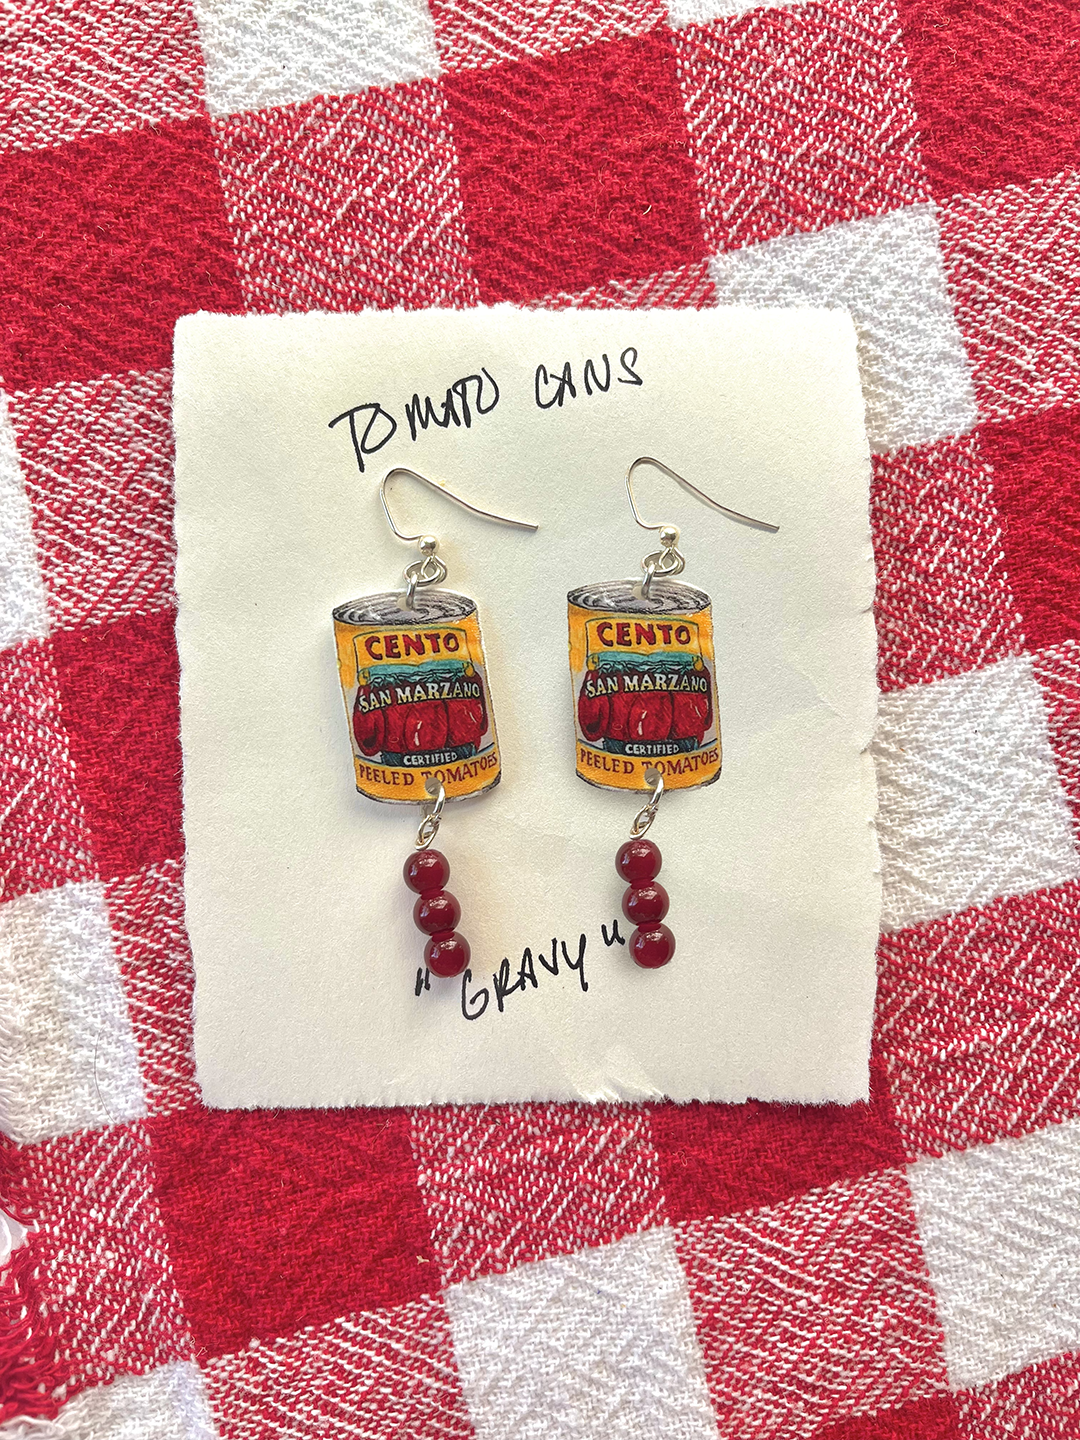 cento tomato cans earrings